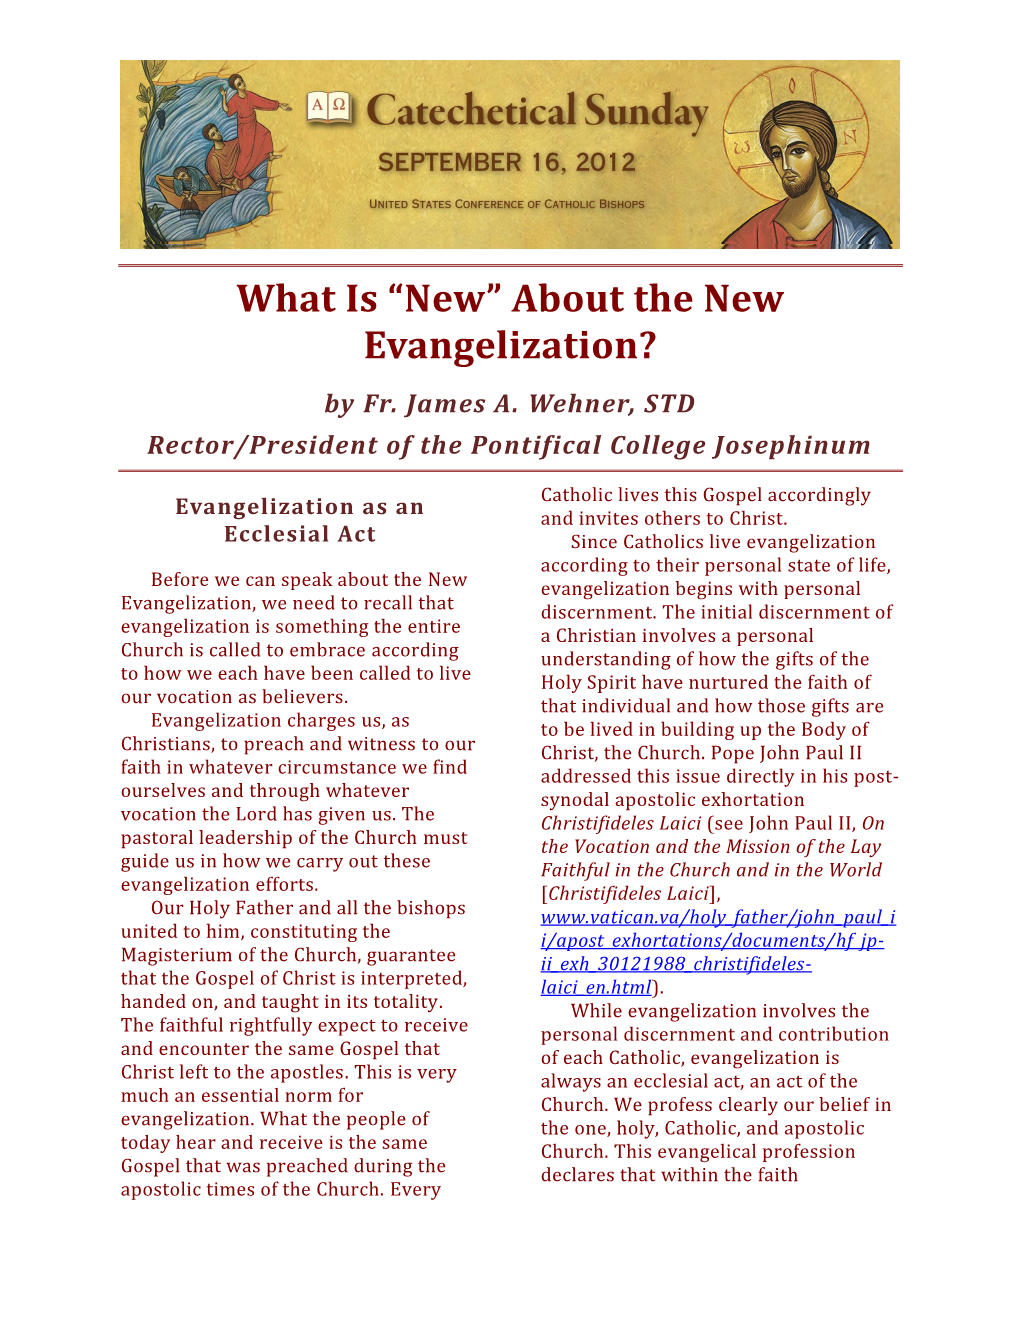 About the New Evangelization? by Fr